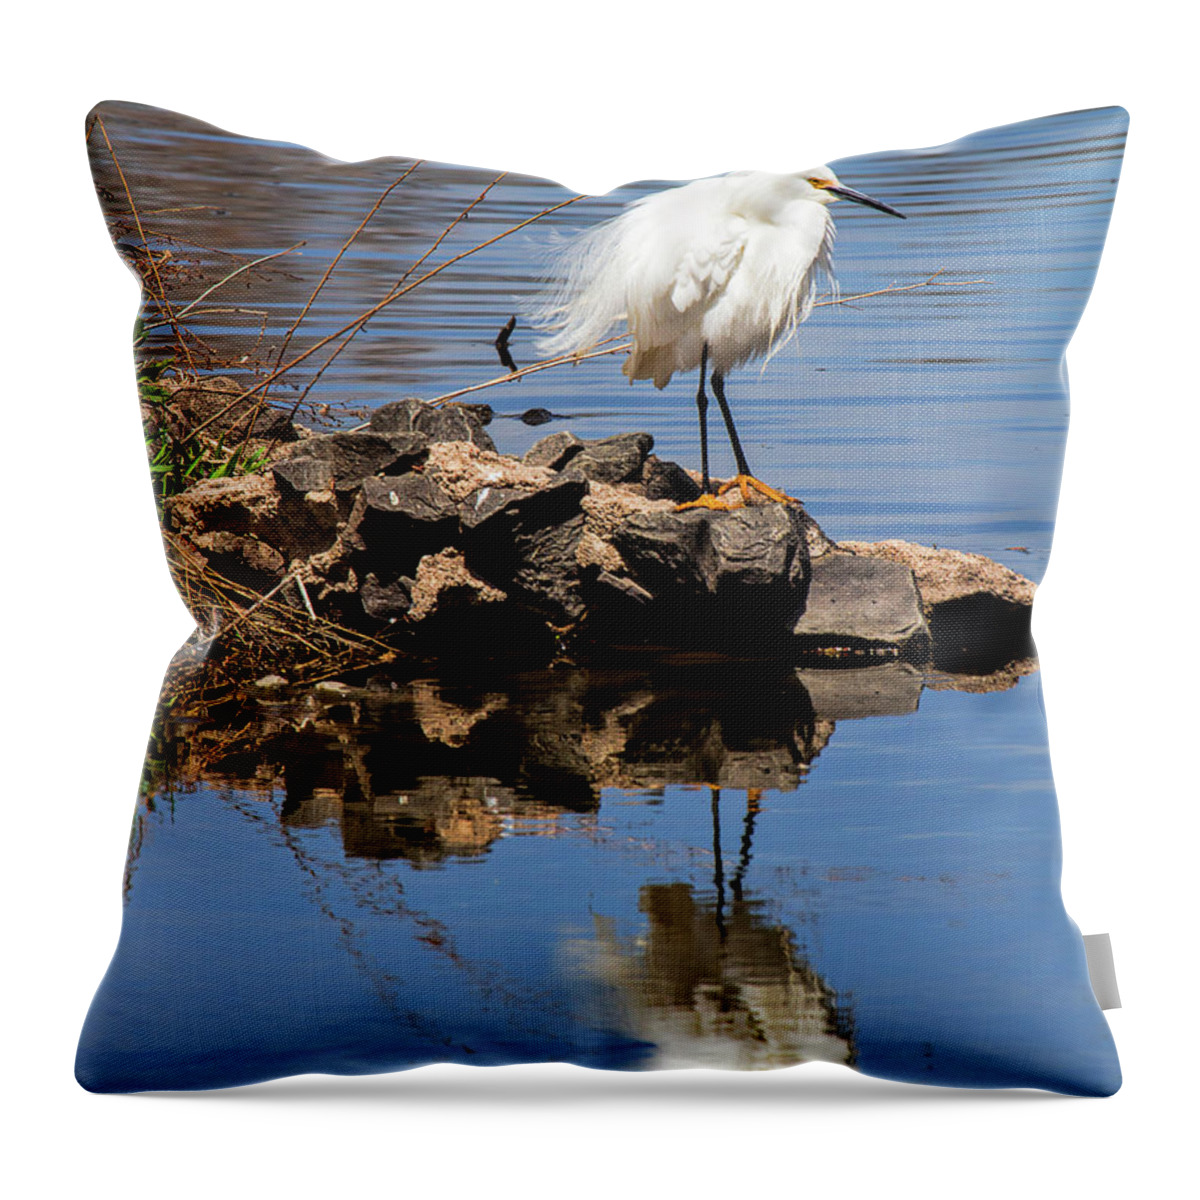 Snowey Egret Throw Pillow featuring the photograph Ruffled Feathers by Jim Garrison